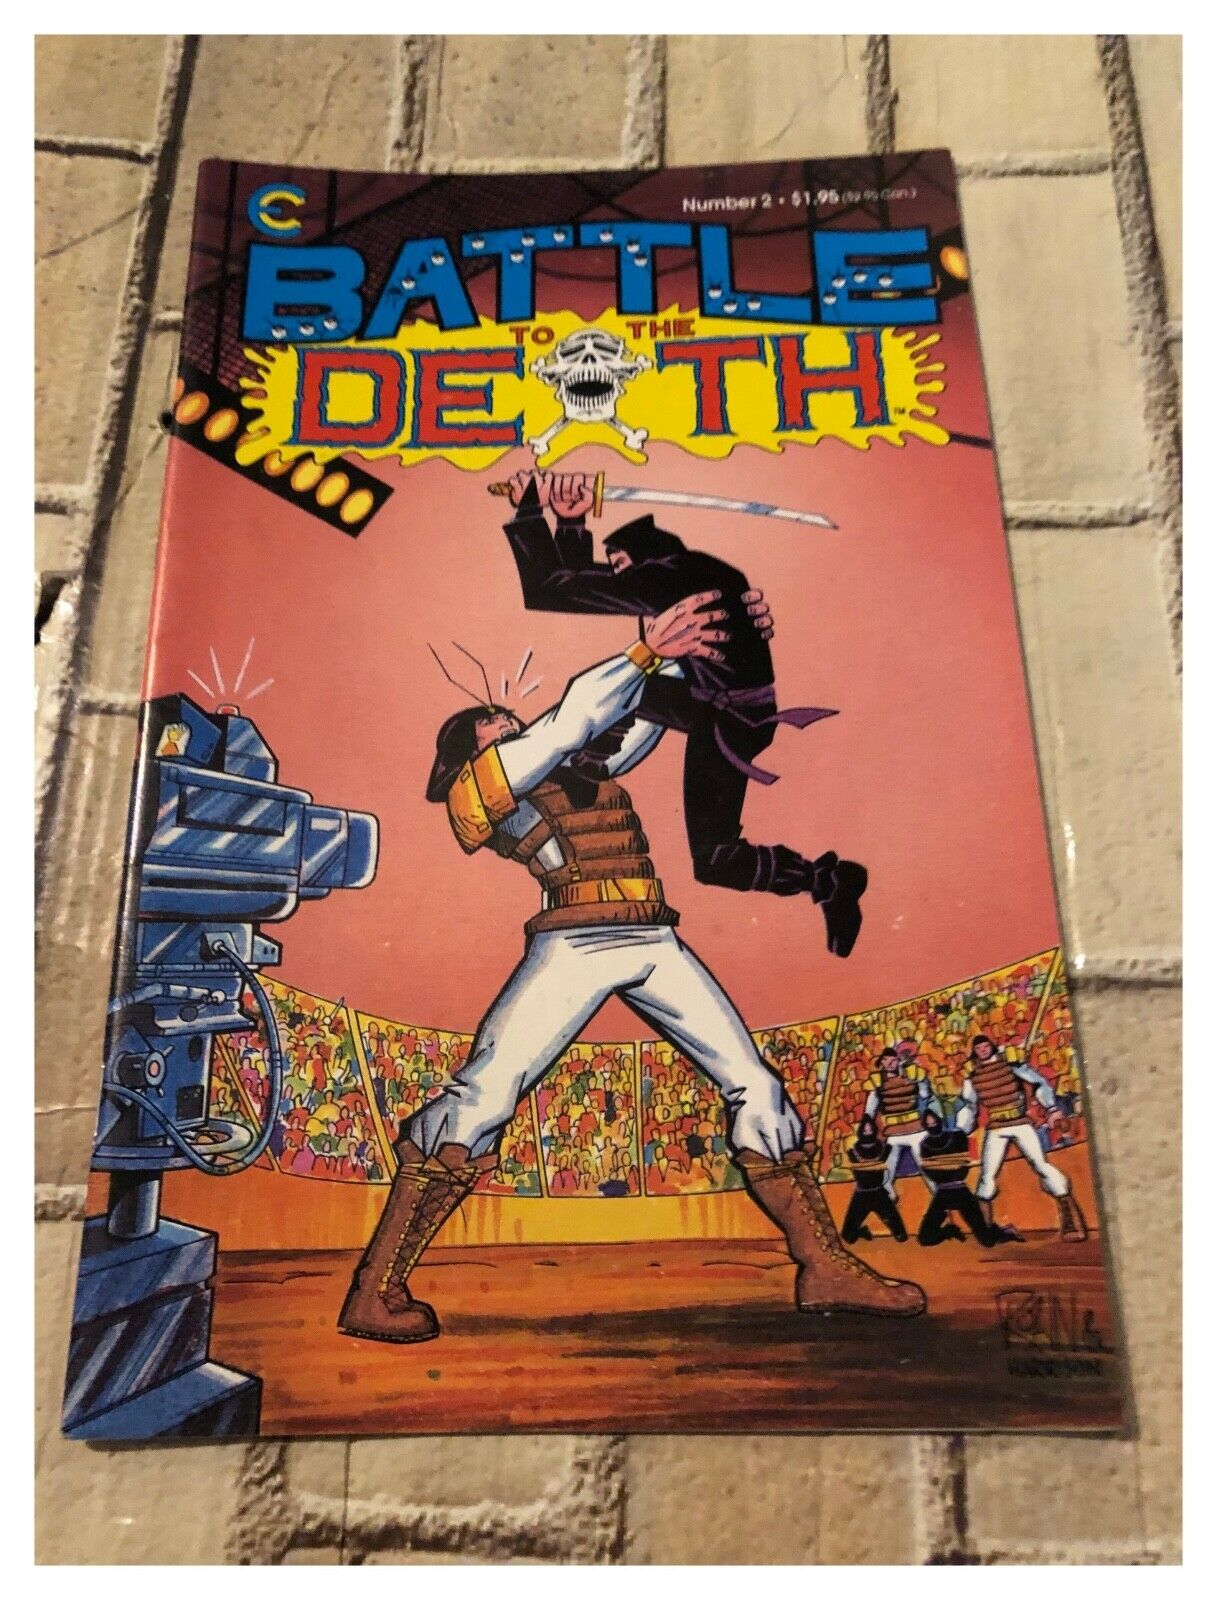 Eternity Comics: Battle to the Death Number 2 (Nov 1987)